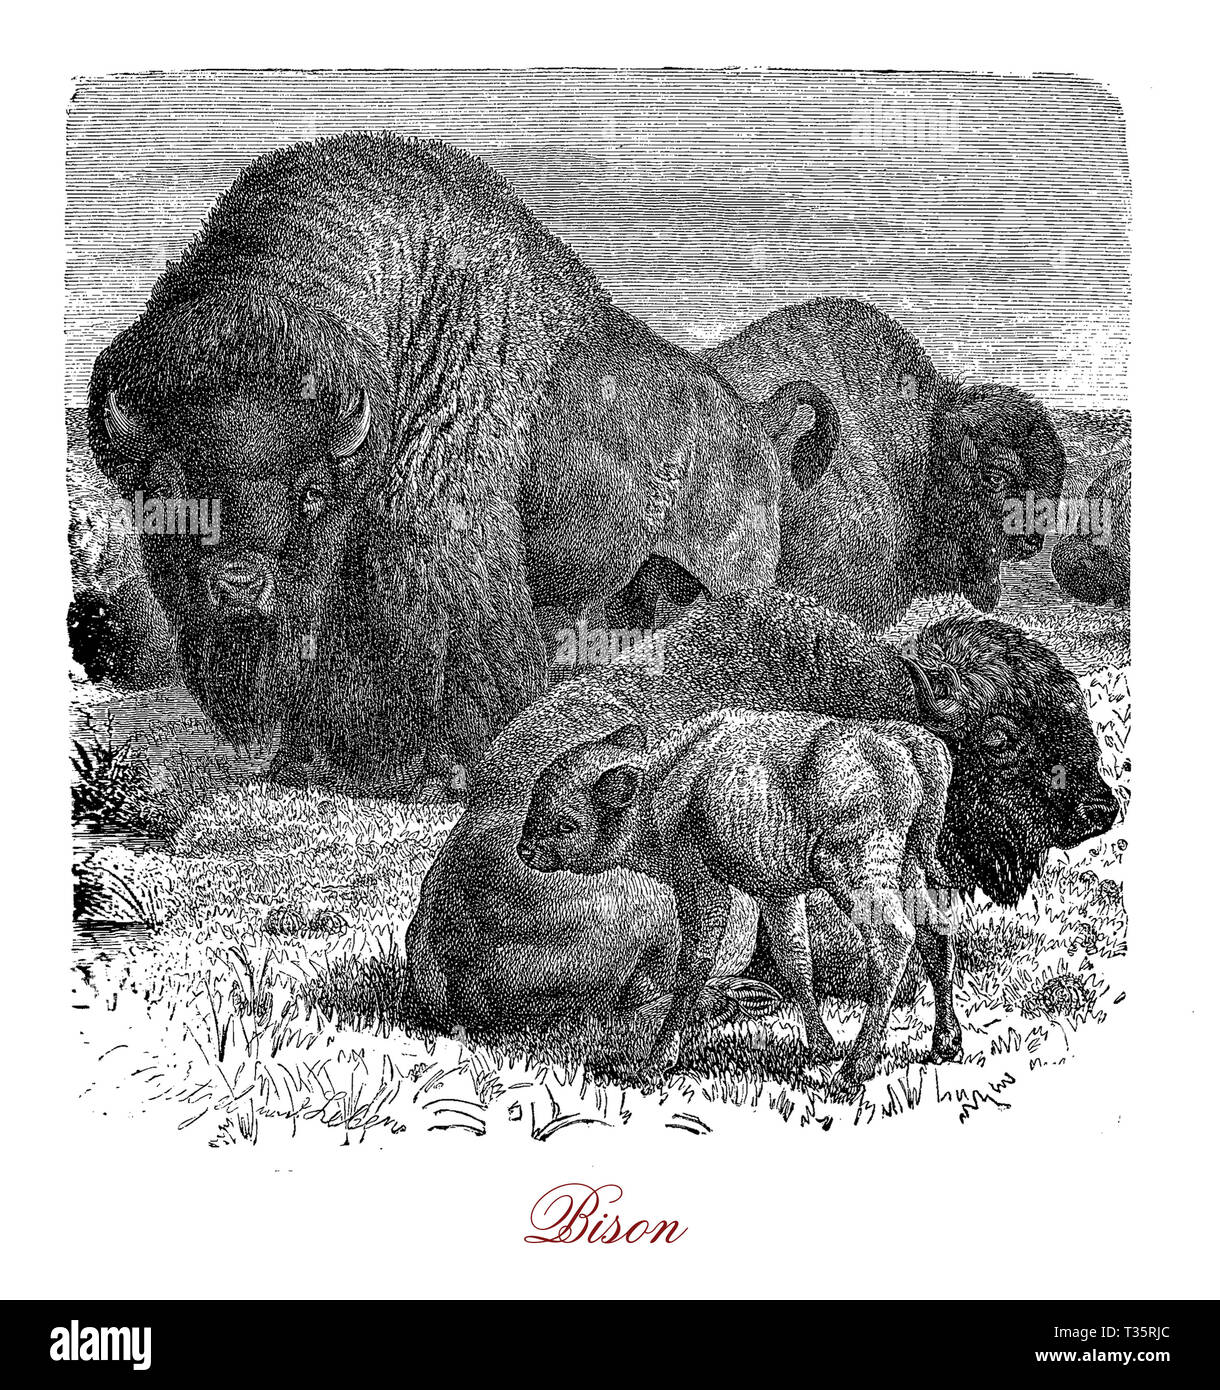 The bison is the largest surviving terrestrial animal in North America and Europe broad and muscular with shaggy coats of long hair. Stock Photo